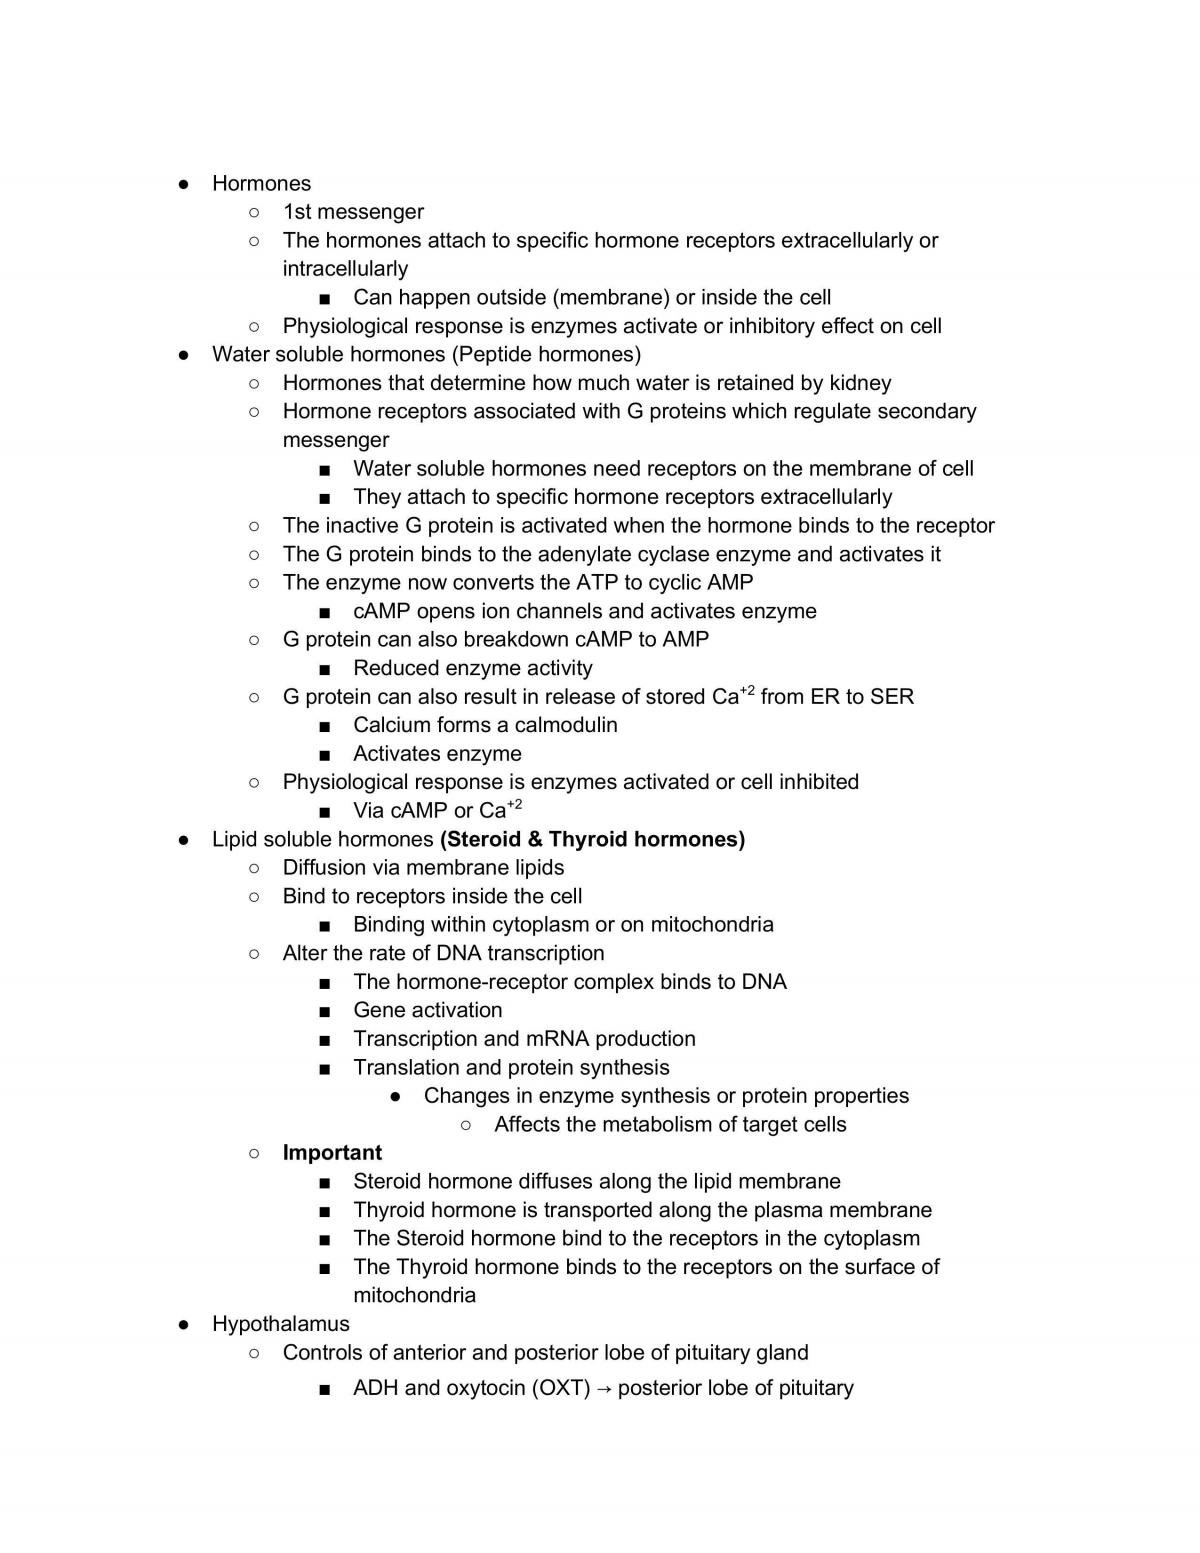 Fundamentals of Human Anatomy and Physiology Study Notes - Page 50